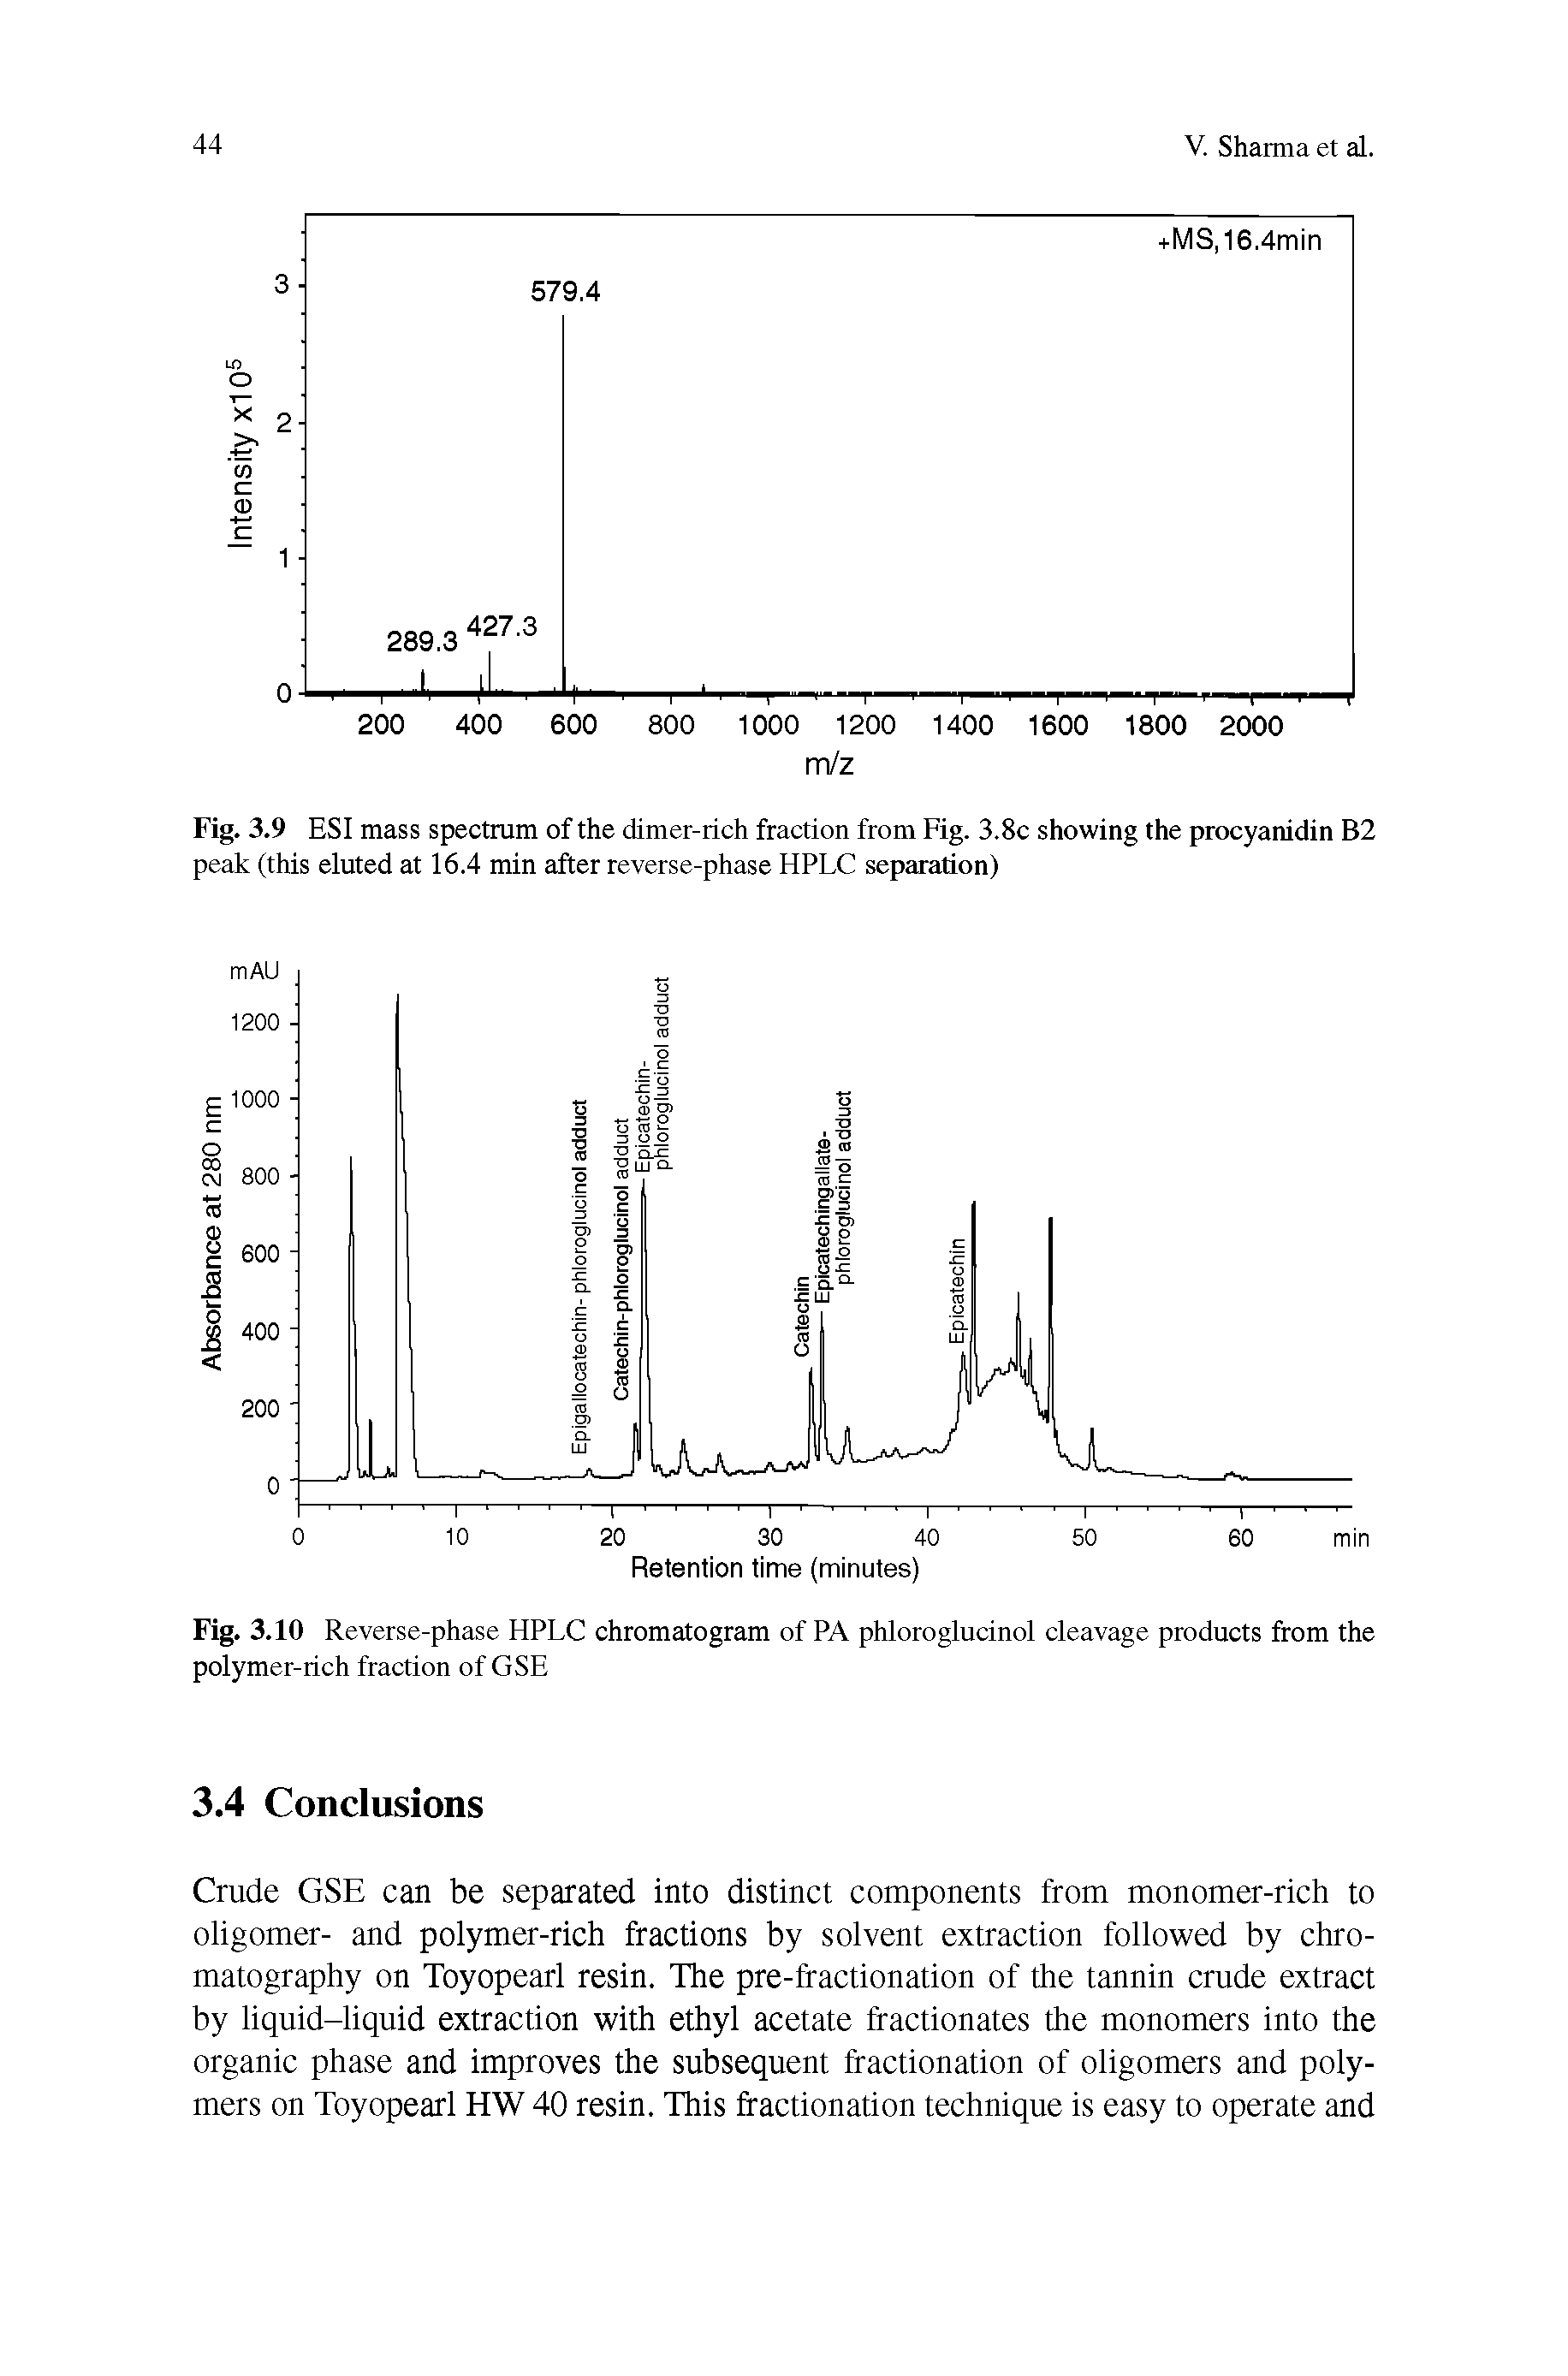 Fig. 3.9 ESI mass spectrum of the dimer-rich fraction from Fig. 3.8c showing the procyanidin B2 peak (this eluted at 16.4 min after reverse-phase HPLC separation)...